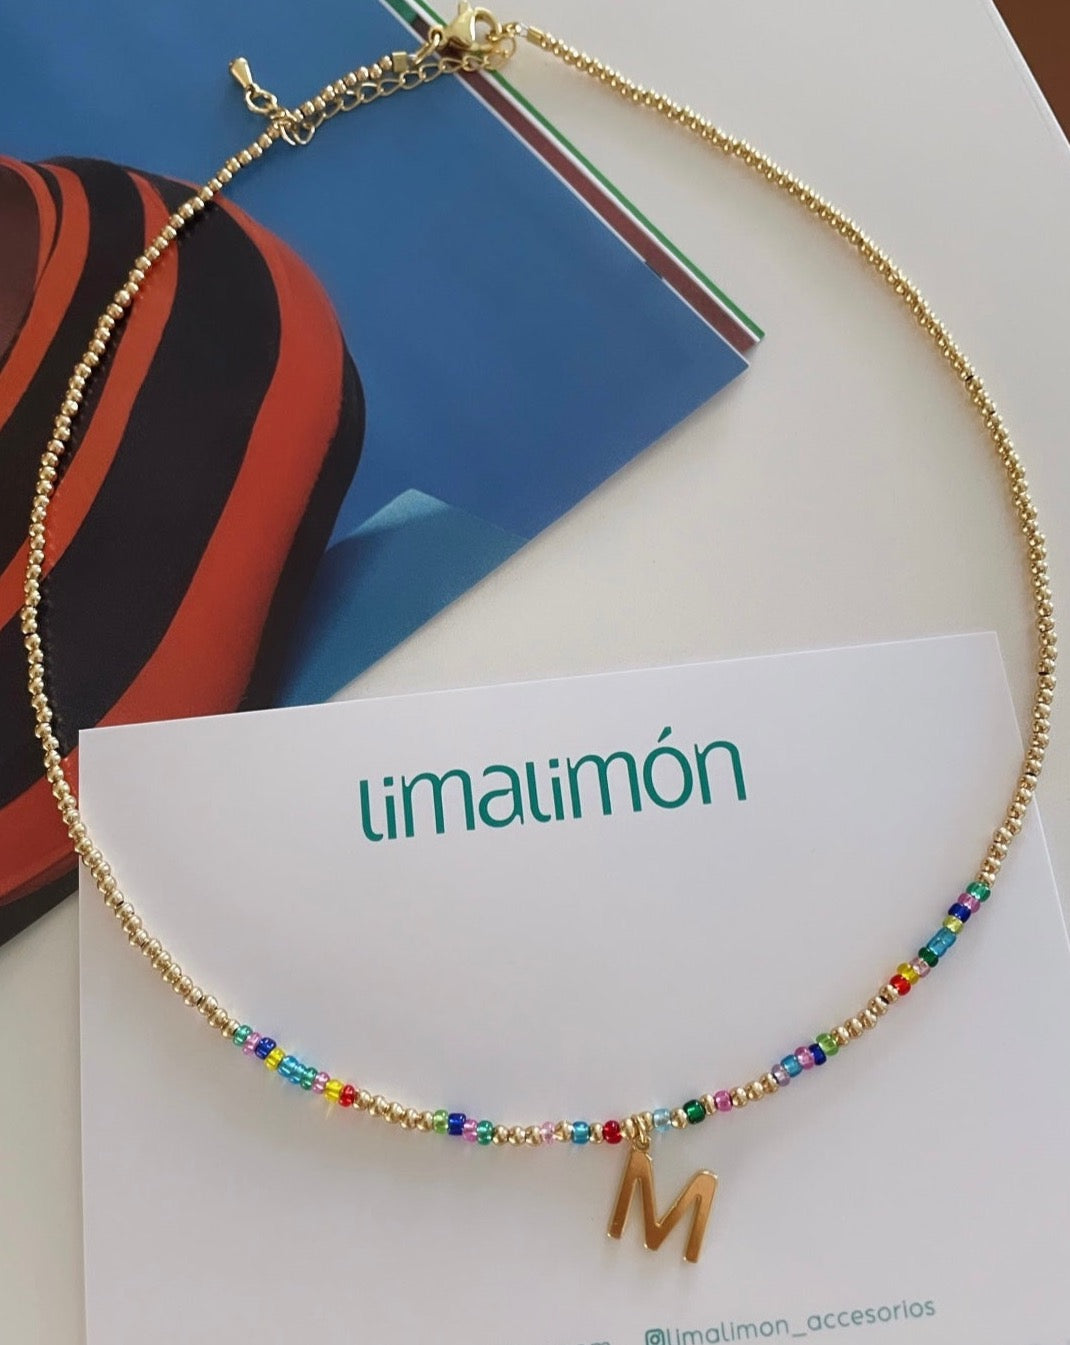 Initial Necklace - LimaLimón Store